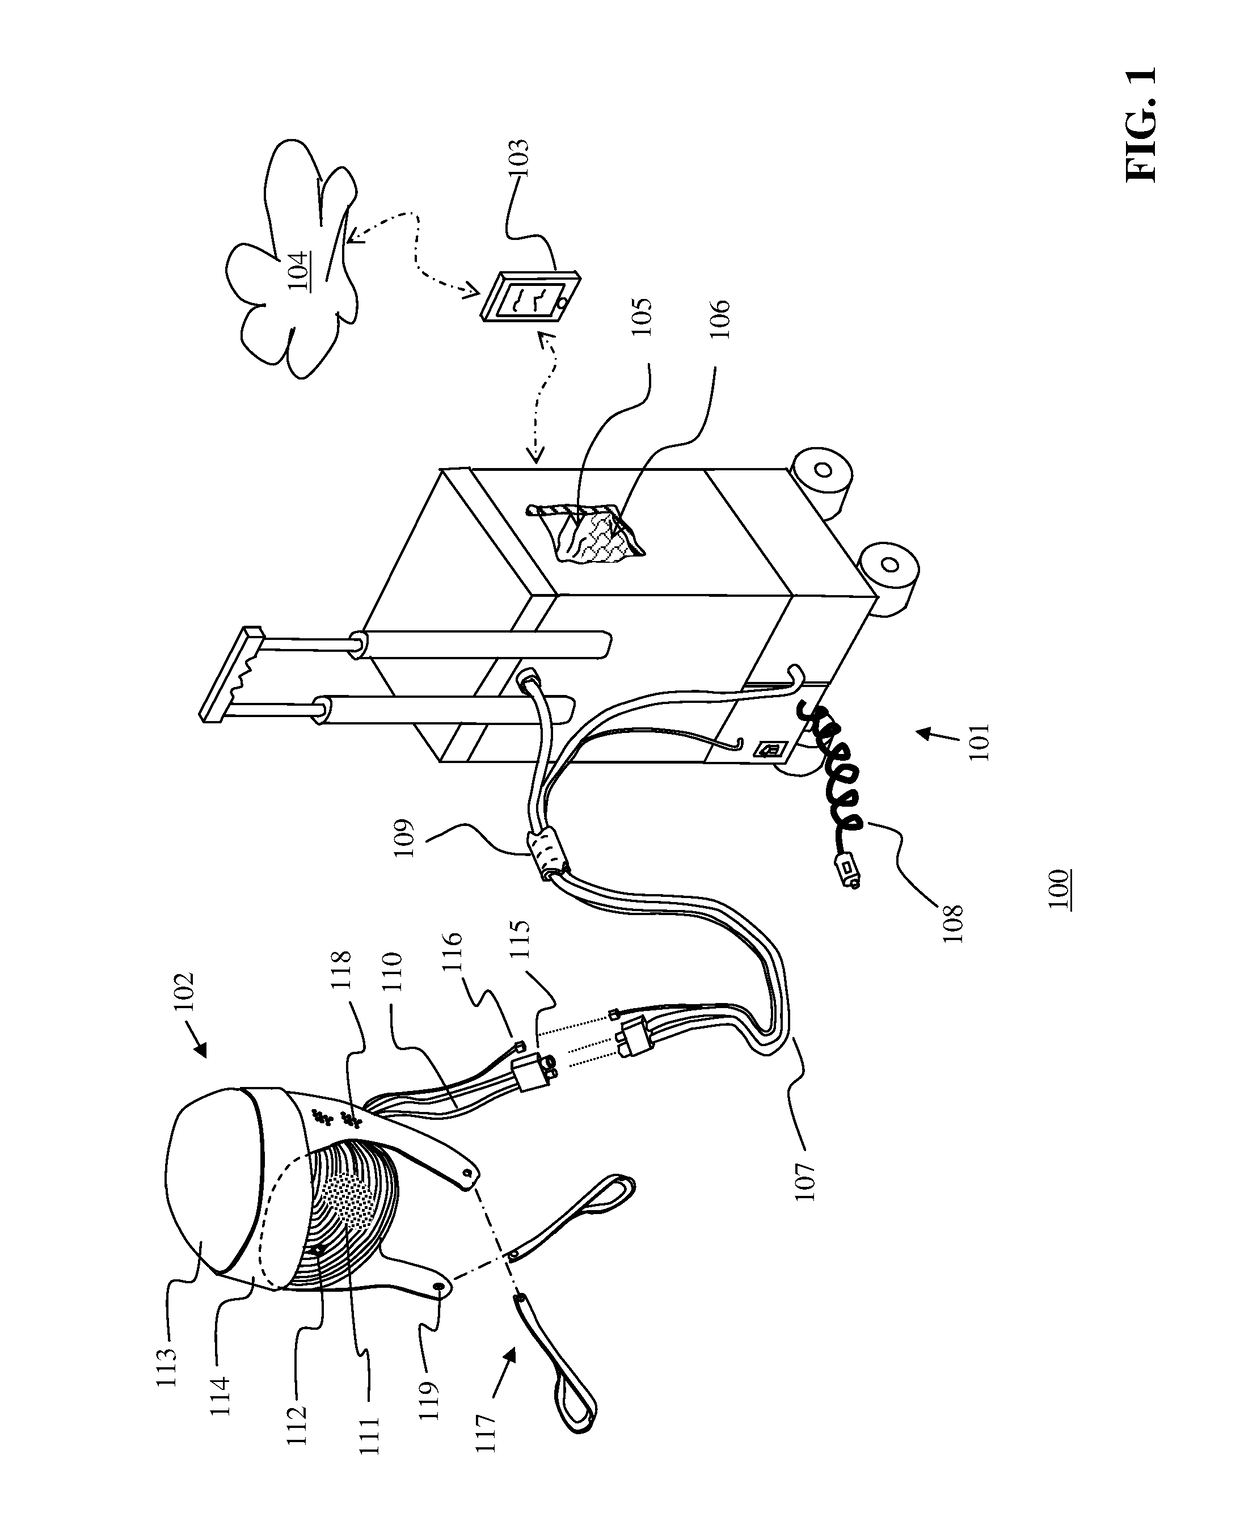 Method and Apparatus of a Self-Managed Portable Hypothermia System